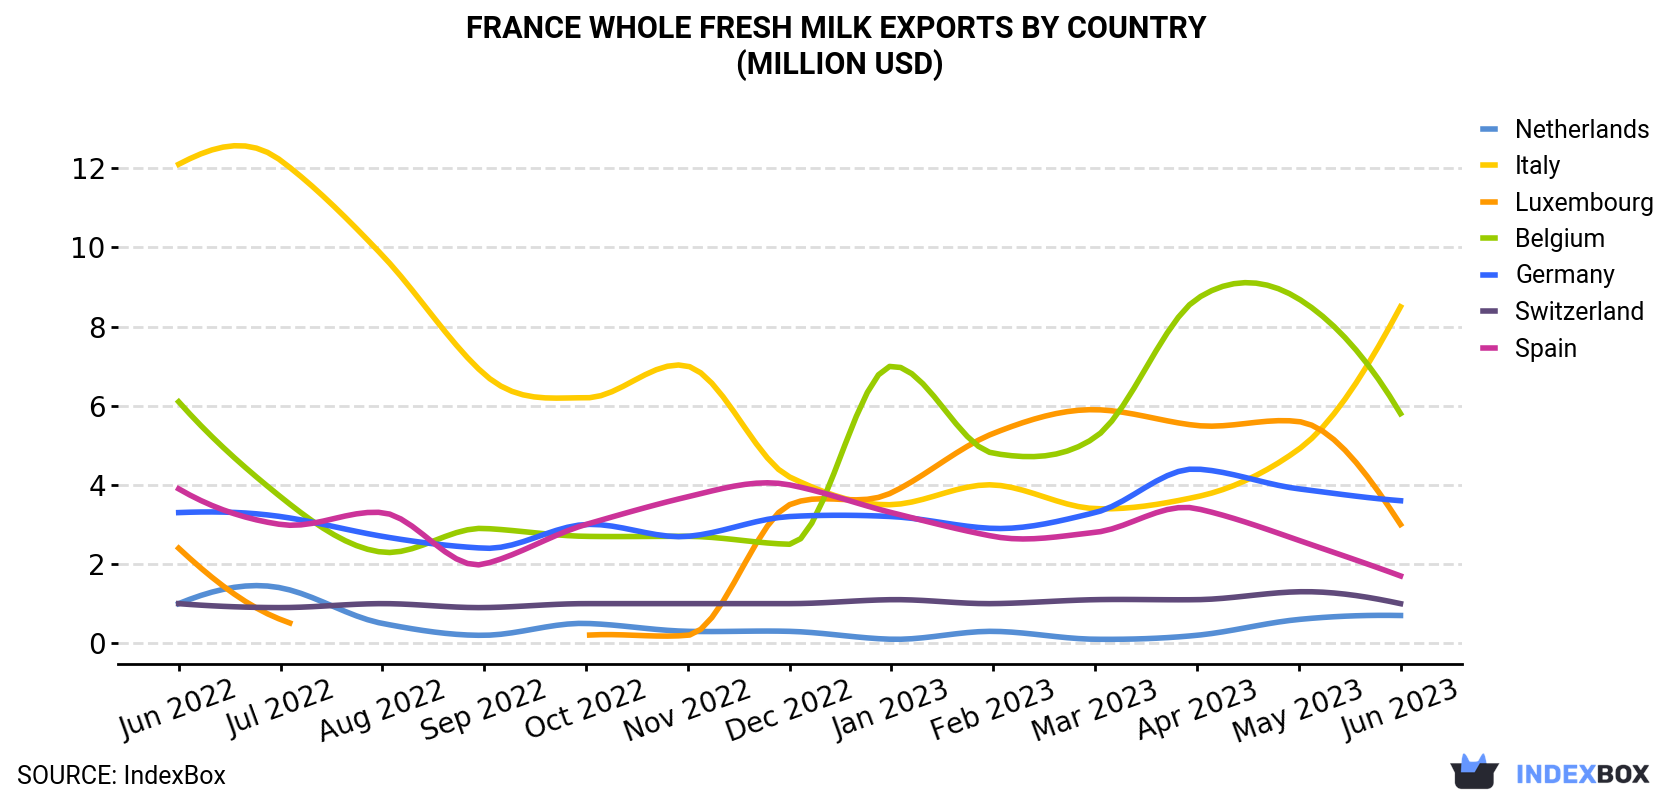 France Whole Fresh Milk Exports By Country (Million USD)